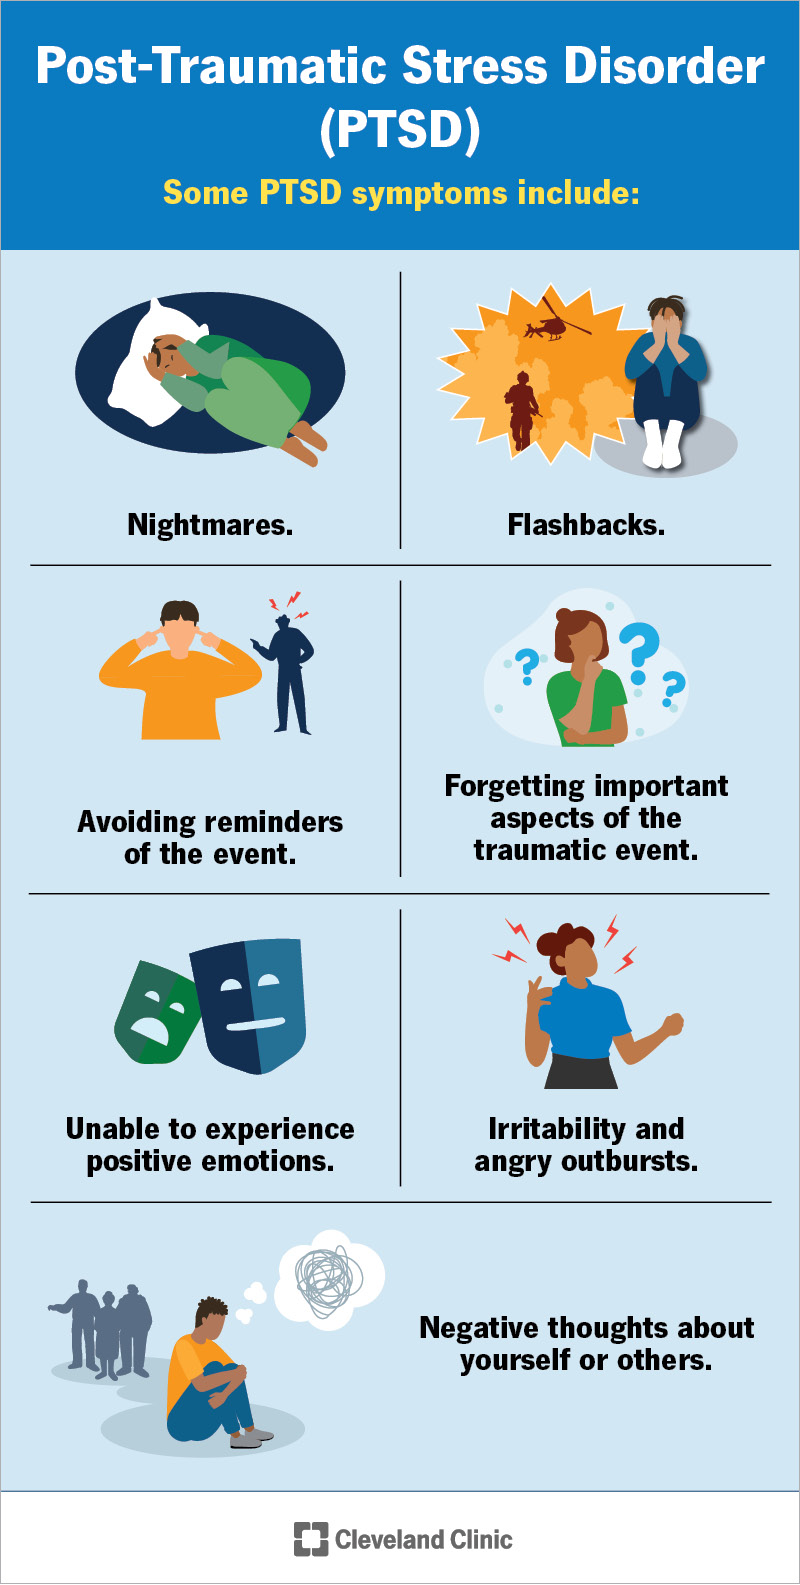 Symptoms of PTSD include nightmares, flashbacks, irritability, angry outbursts and more.